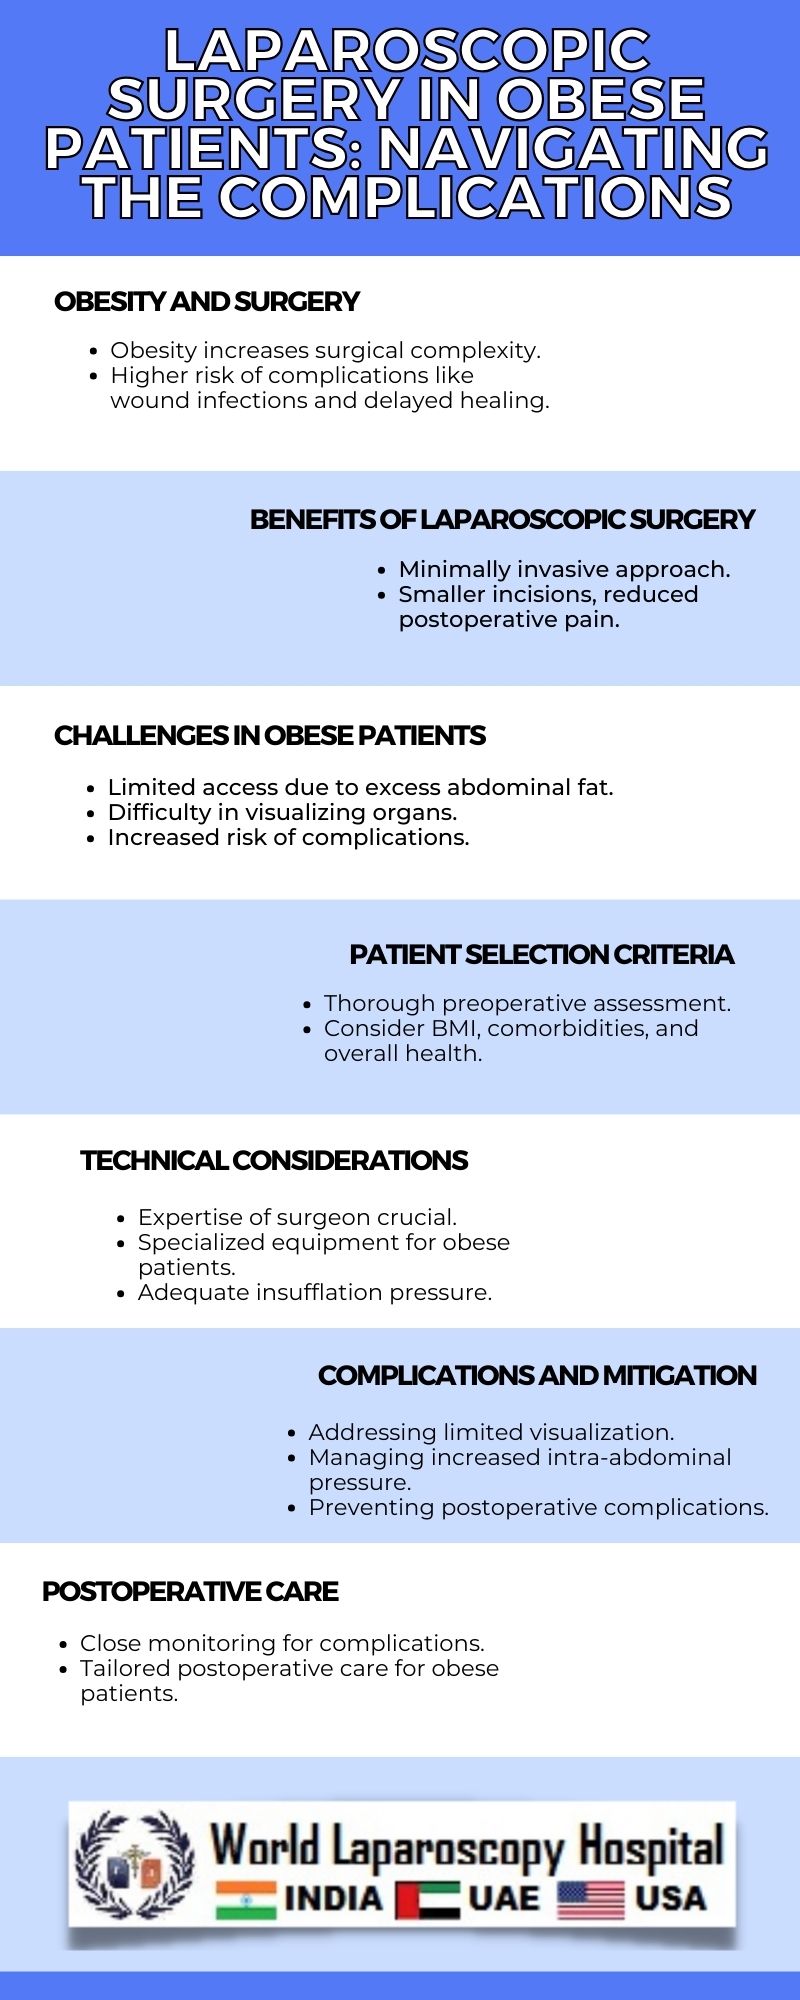 Laparoscopic Surgery in Obese Patients: Navigating the Complications